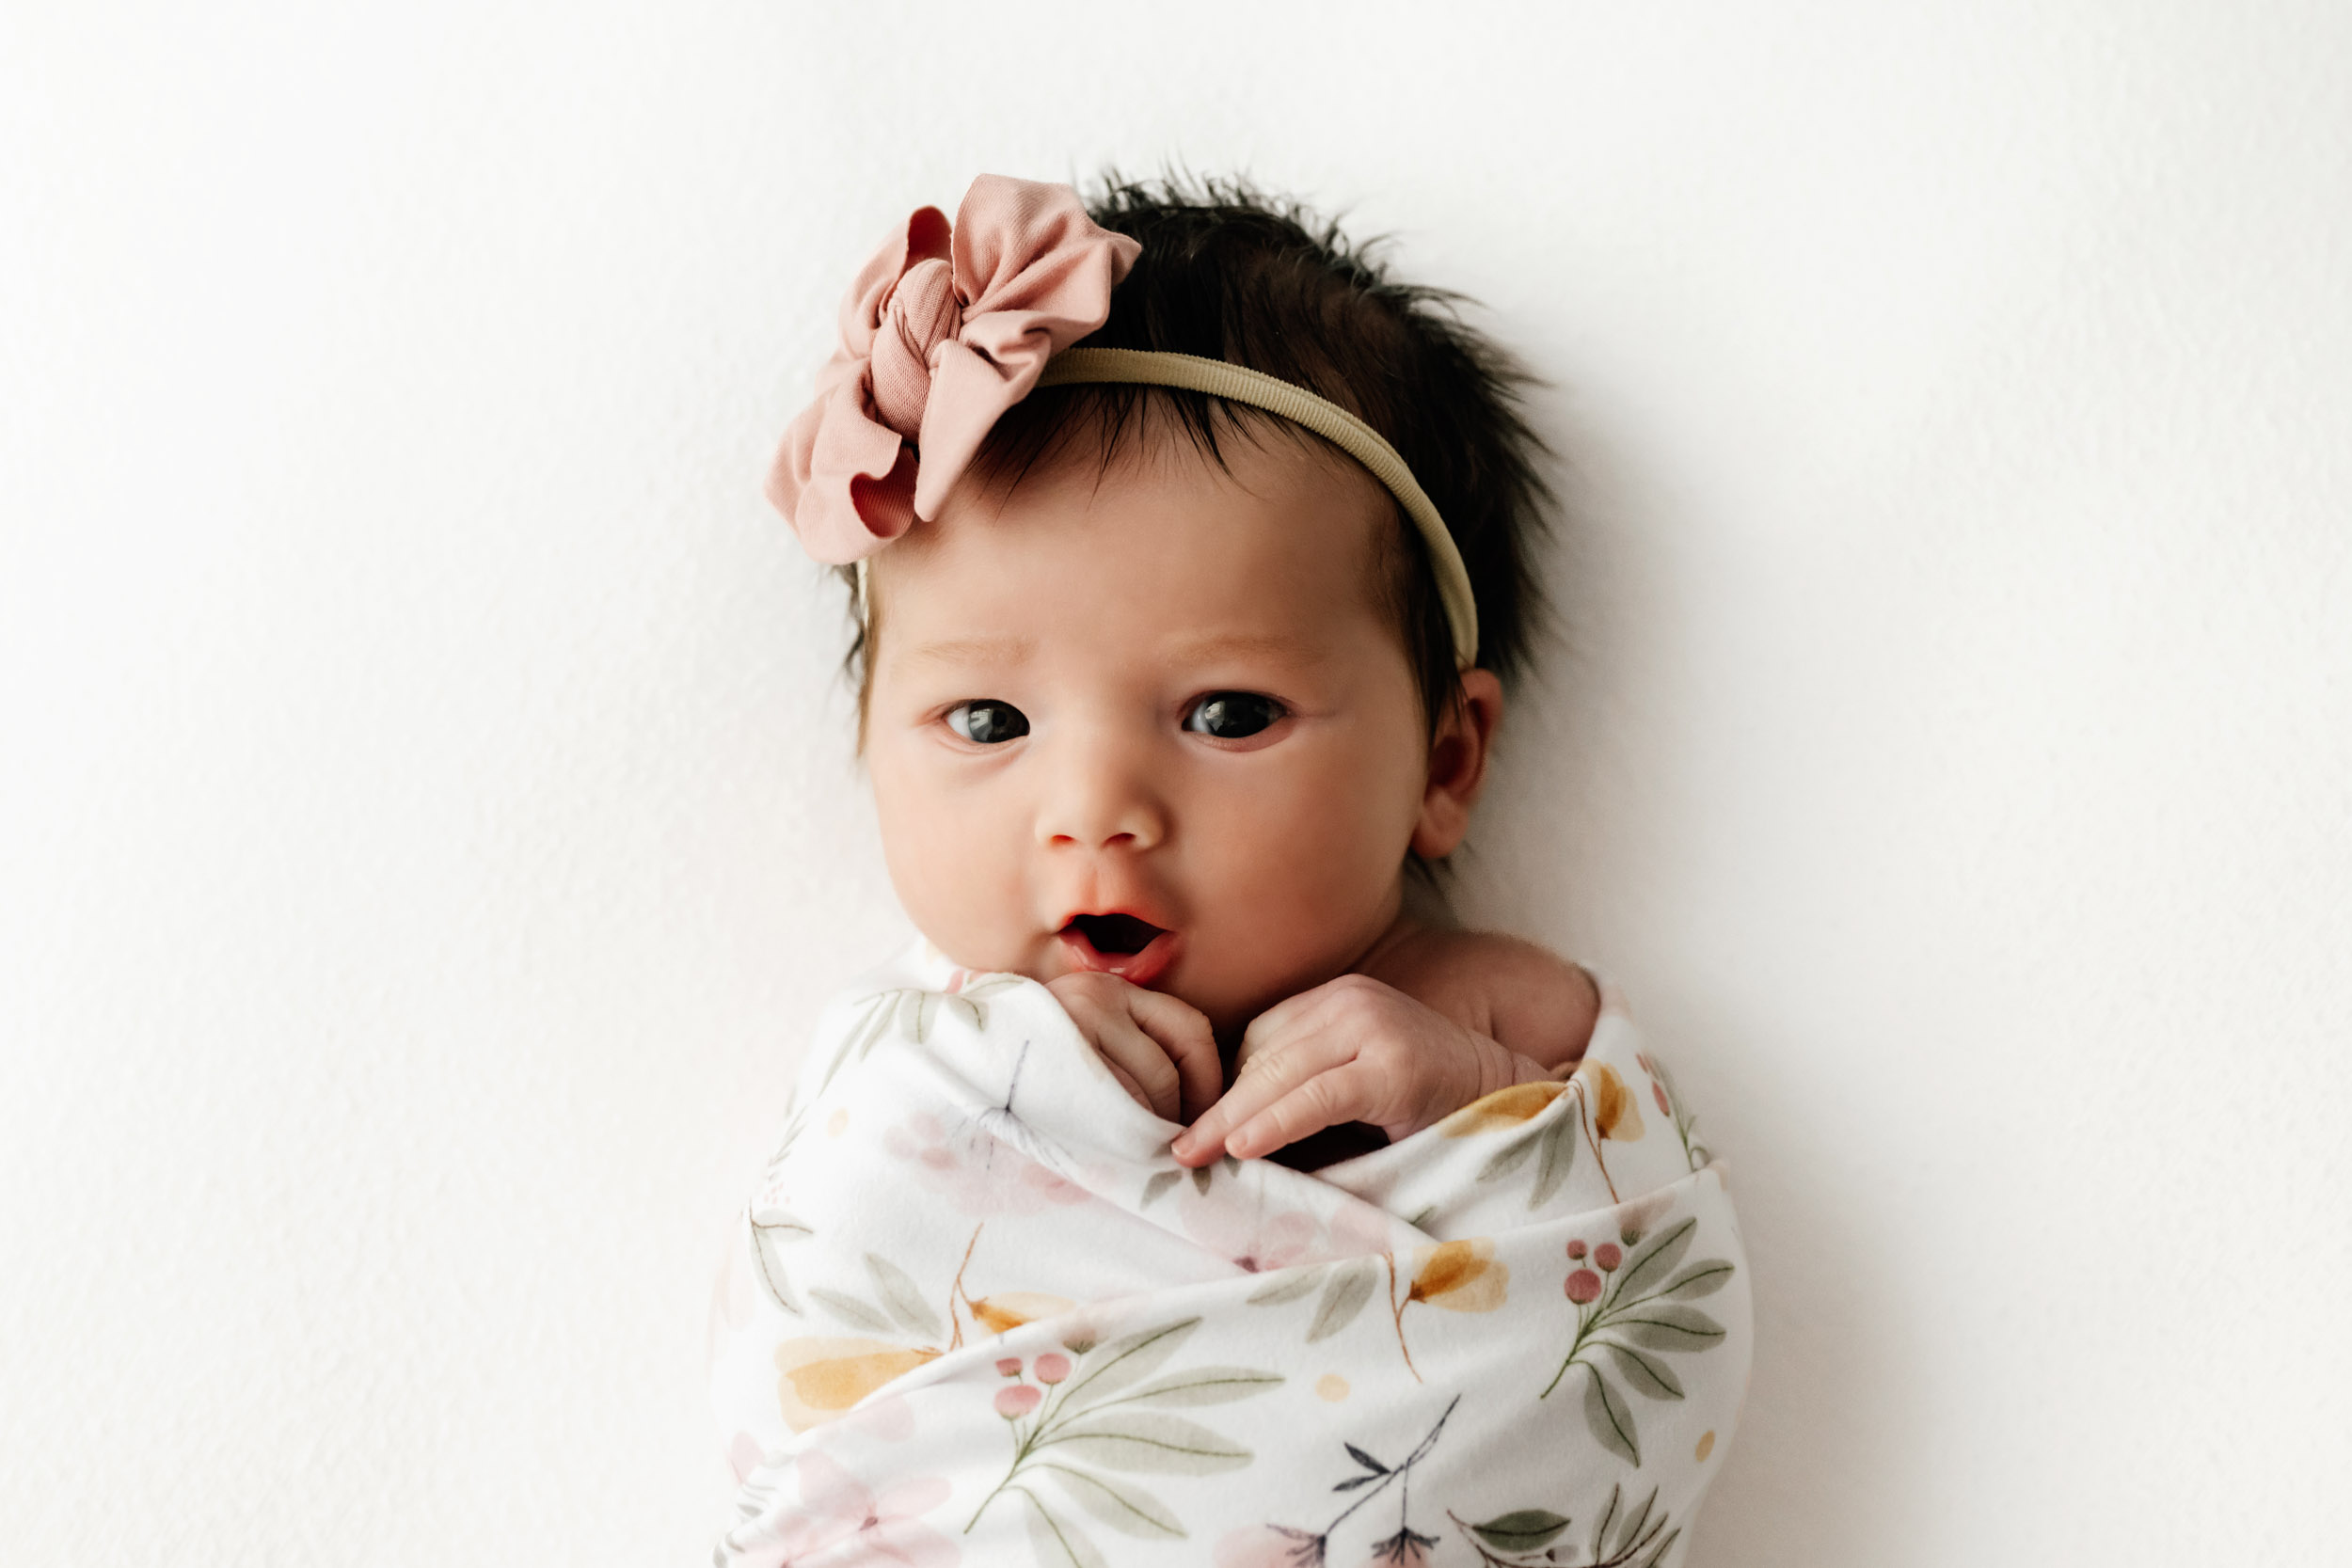 a baby girl wrapped in a floral swaddle blanket wearing a pink headband and looking directly at the camera during a natural newborn photos session